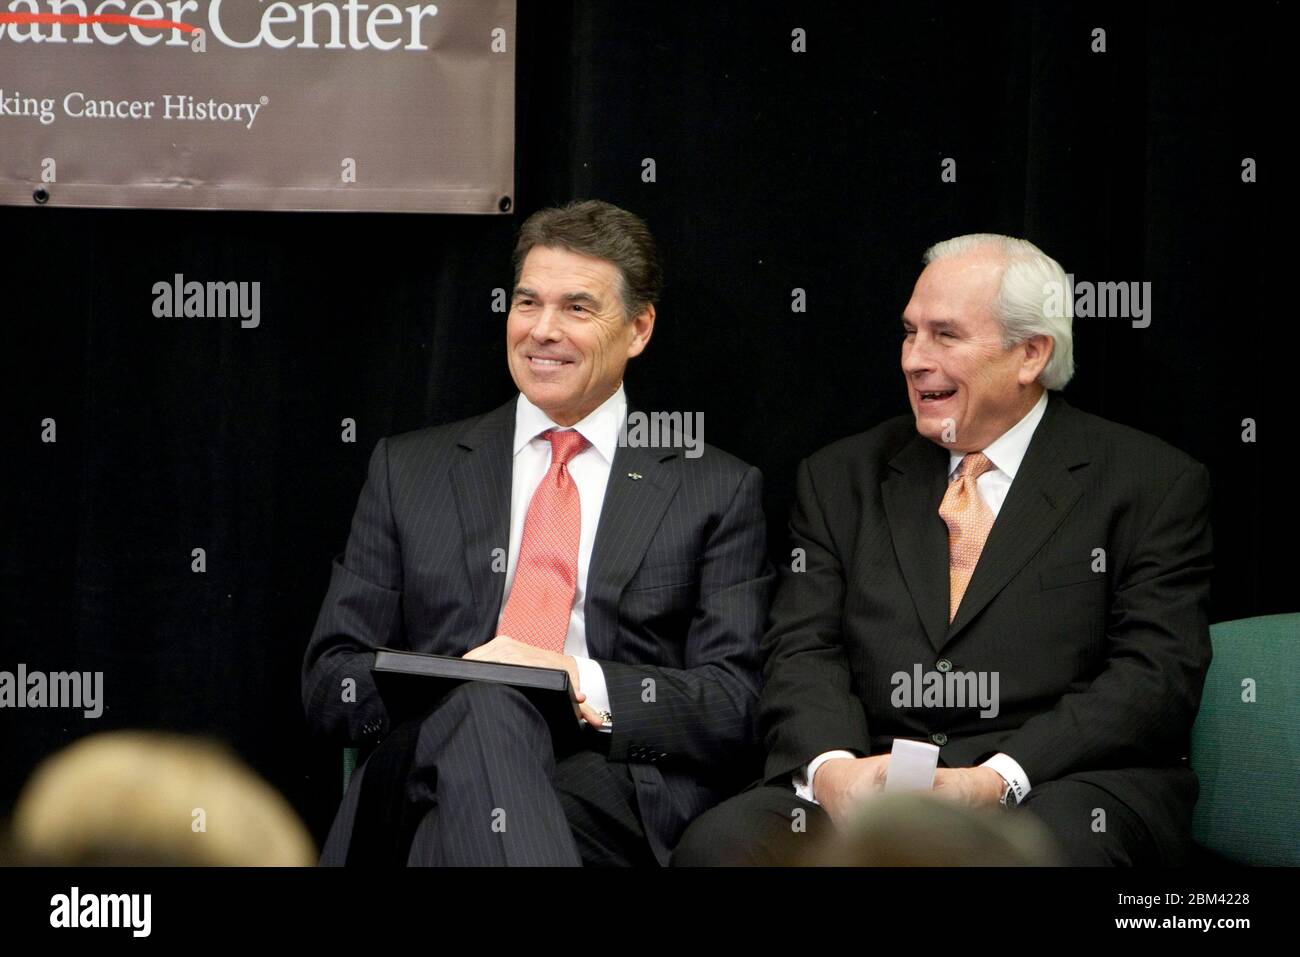 Houston, Texas USA, November 28, 2011: Texas Gov. Rick Perry sits next to University of Texas System Board of Regents Chairman Eugene 'Gene' Powell at announcement of new Institute for Applied Cancer Science at The University of Texas MD Anderson Cancer Center. ©Marjorie Kamys Cotera/Daemmrich Photography Stock Photo